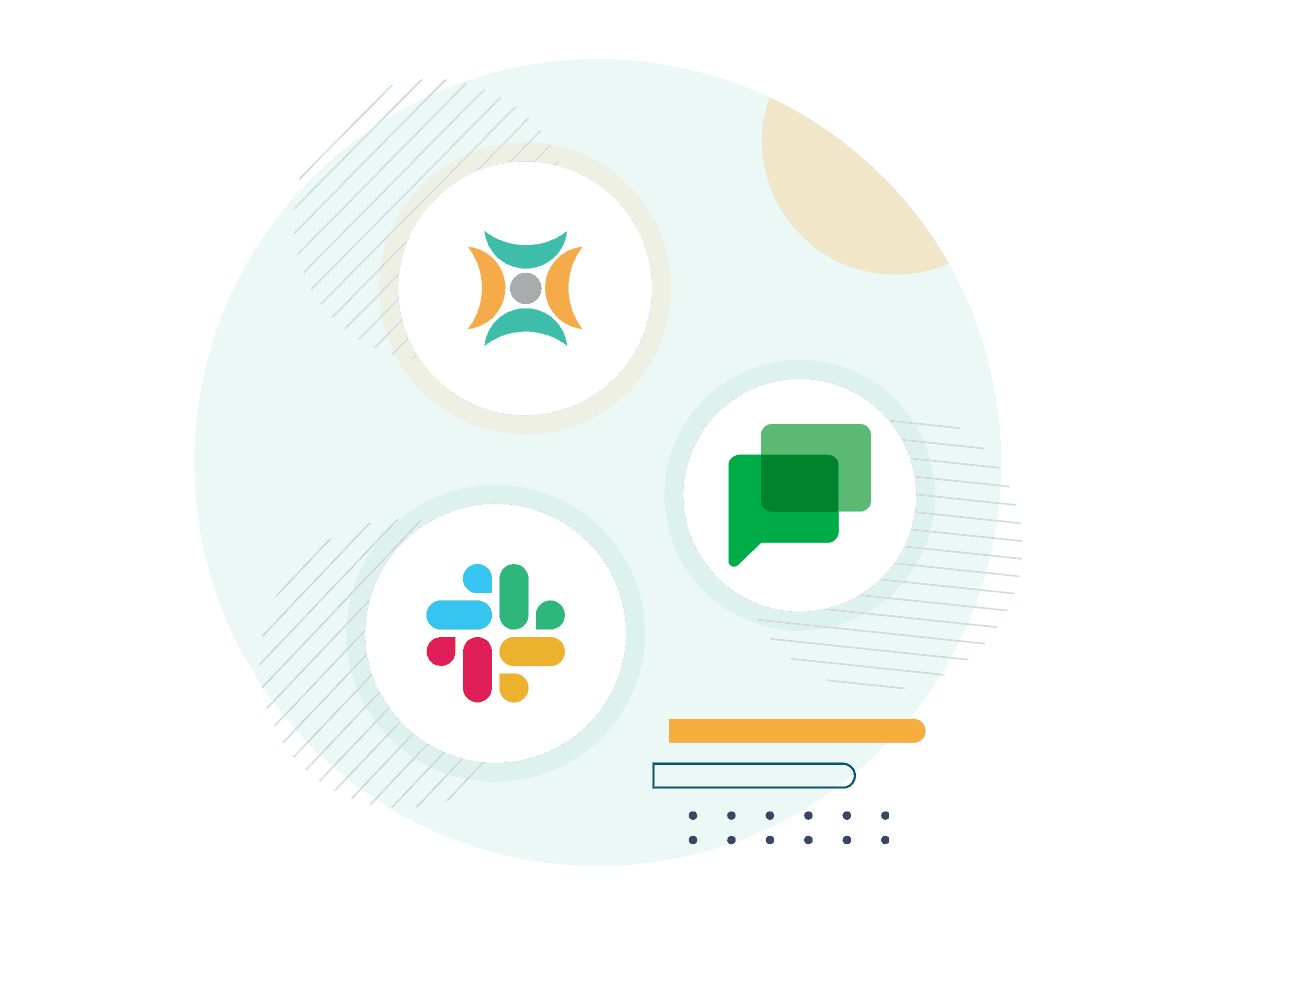 exceed is integrated with third party tools - google chat and slack